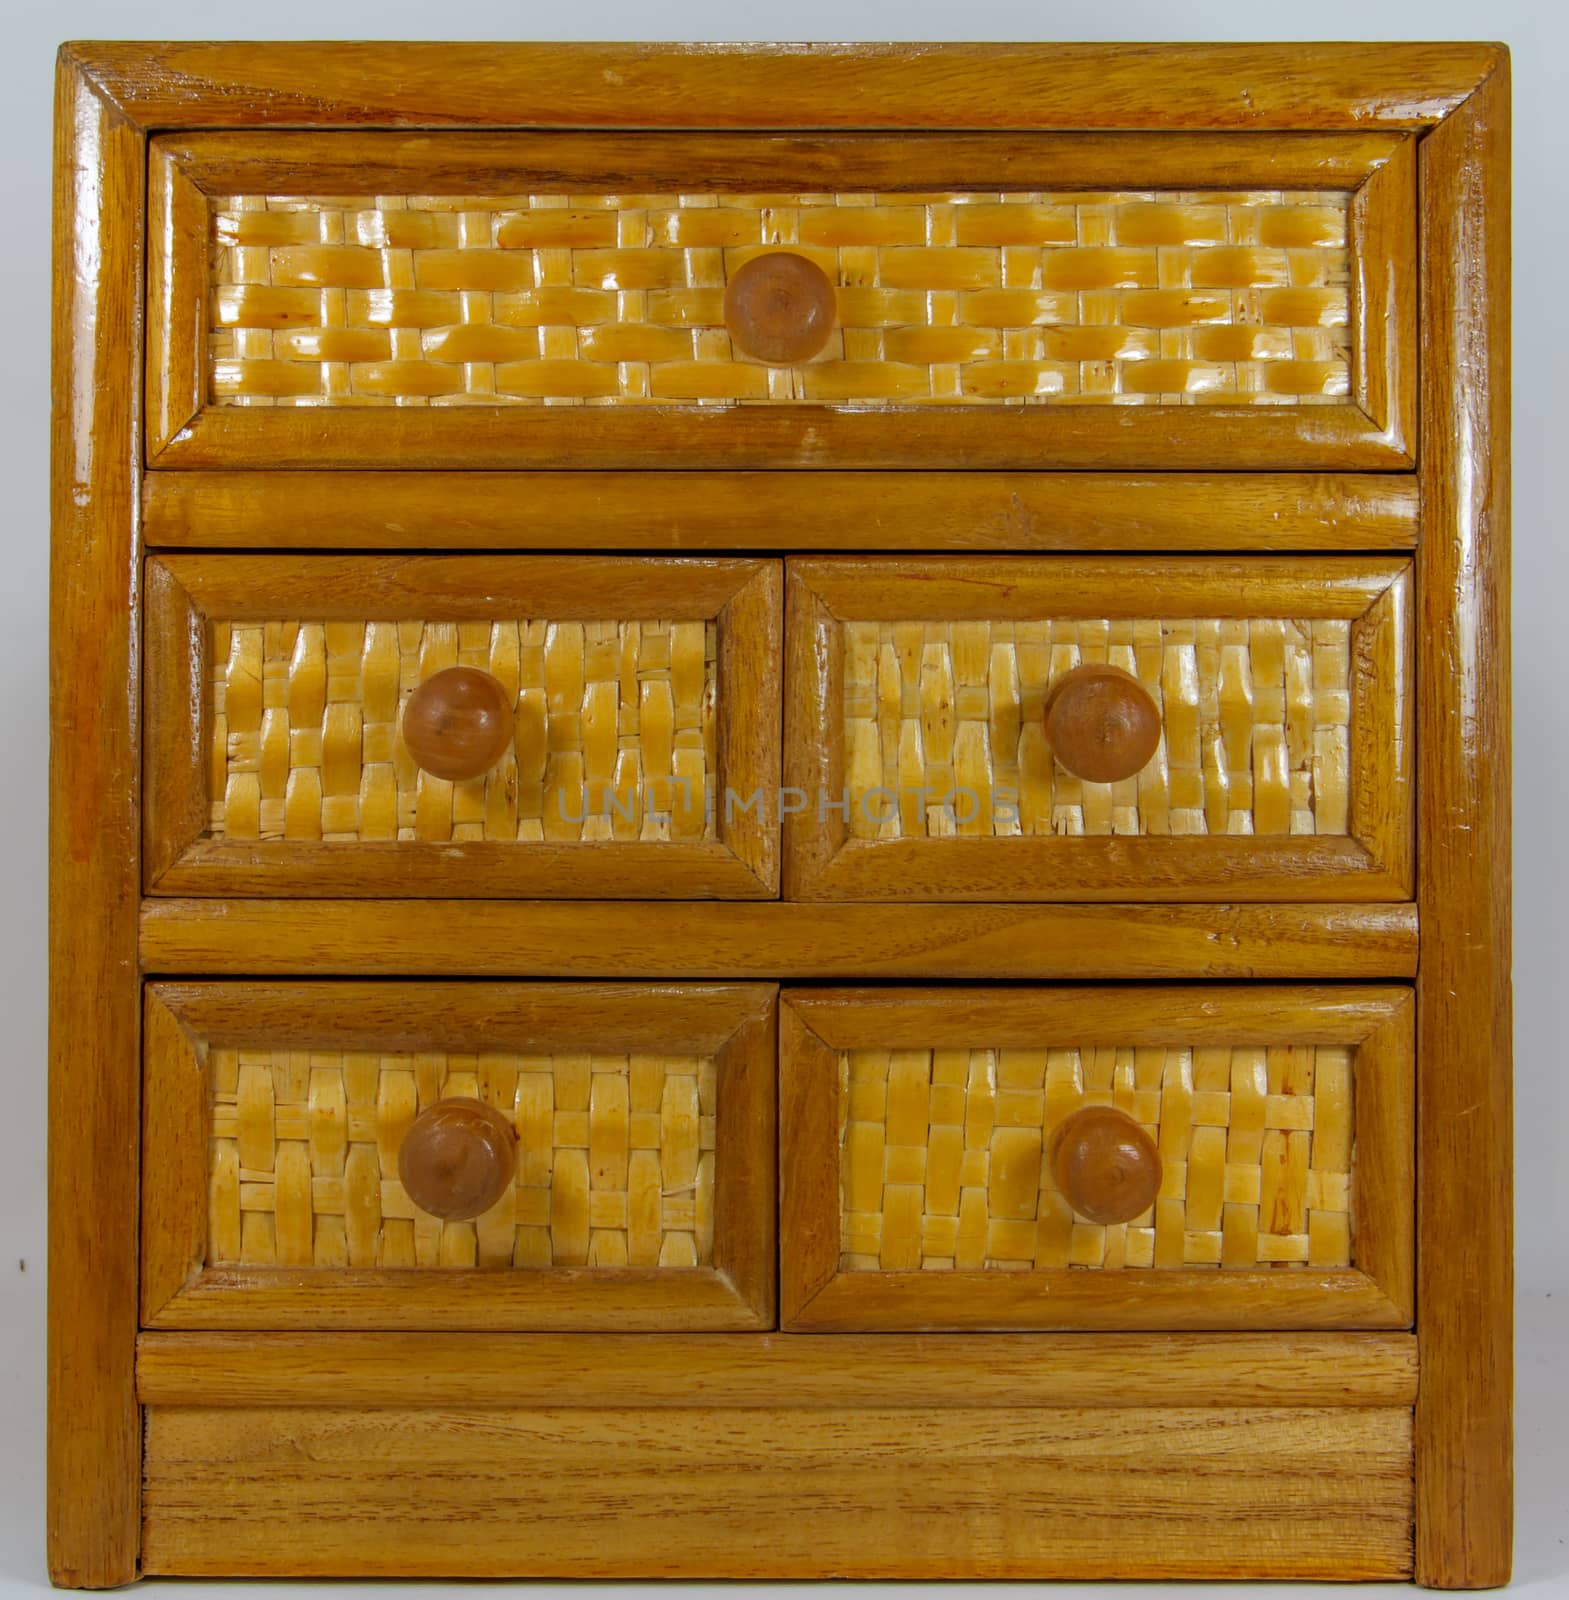 the Brown drawers in white background.